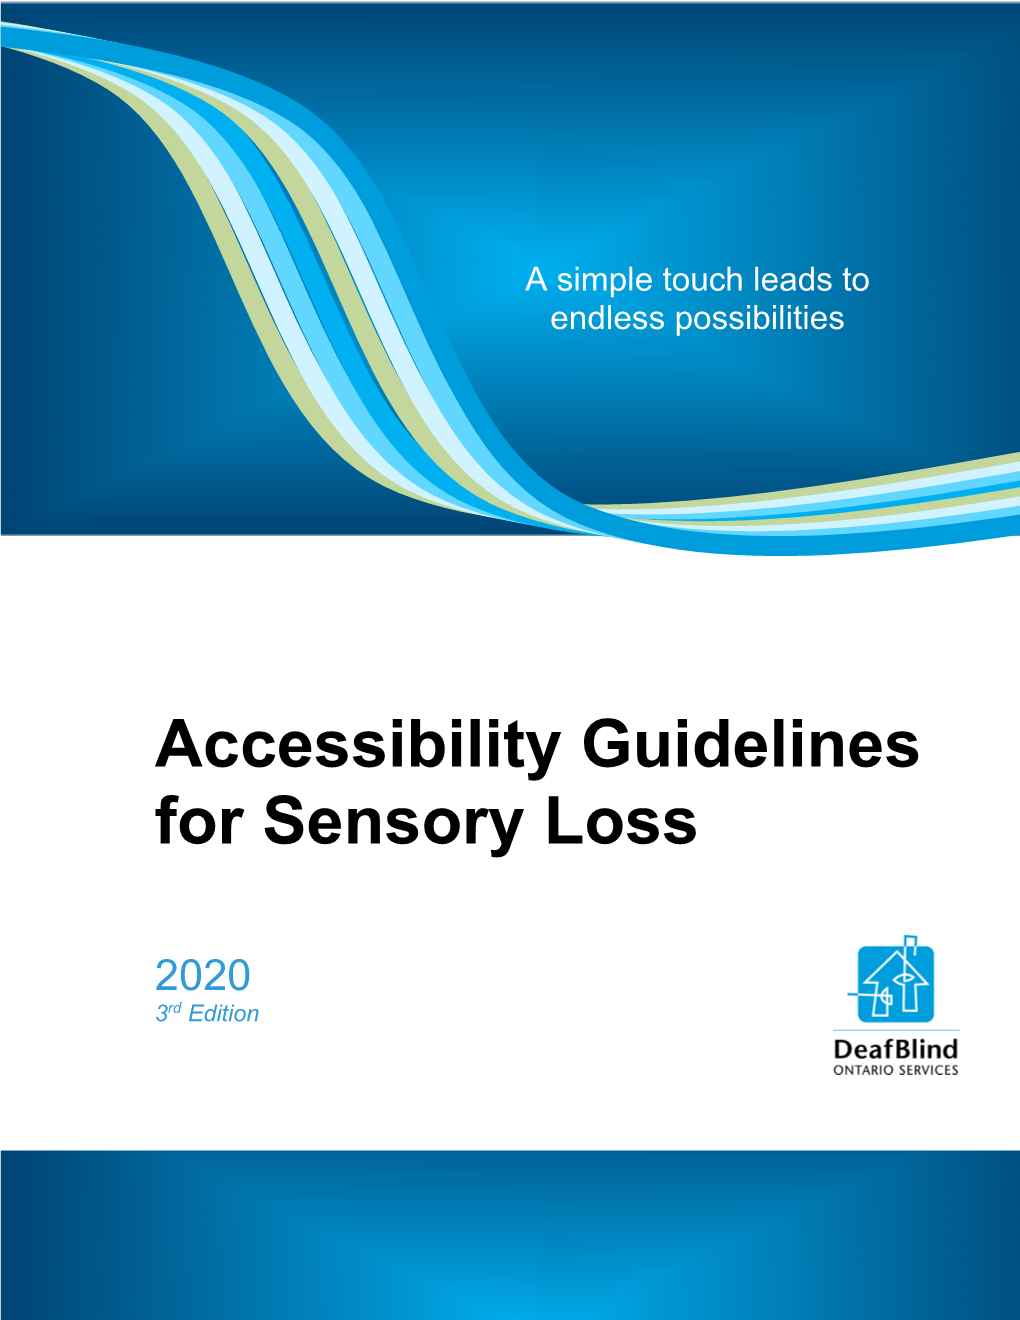 Accessibility Guide for Sensory Loss